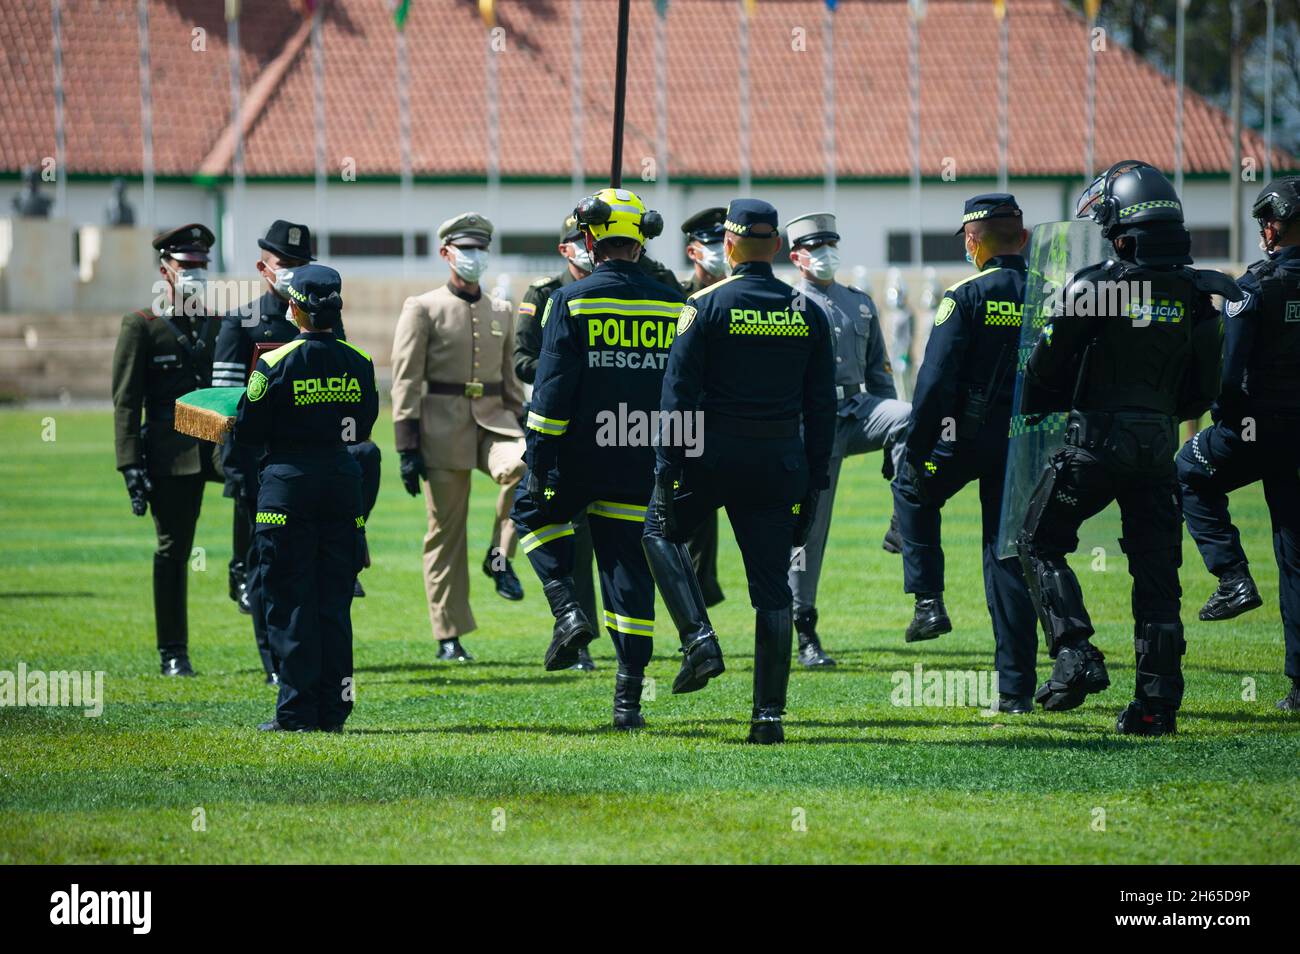 Rescue Police officers participate during an event were Colombia's president Ivan Duque Marquez and Colombia's Minister of Defense Diego Molano in con Stock Photo